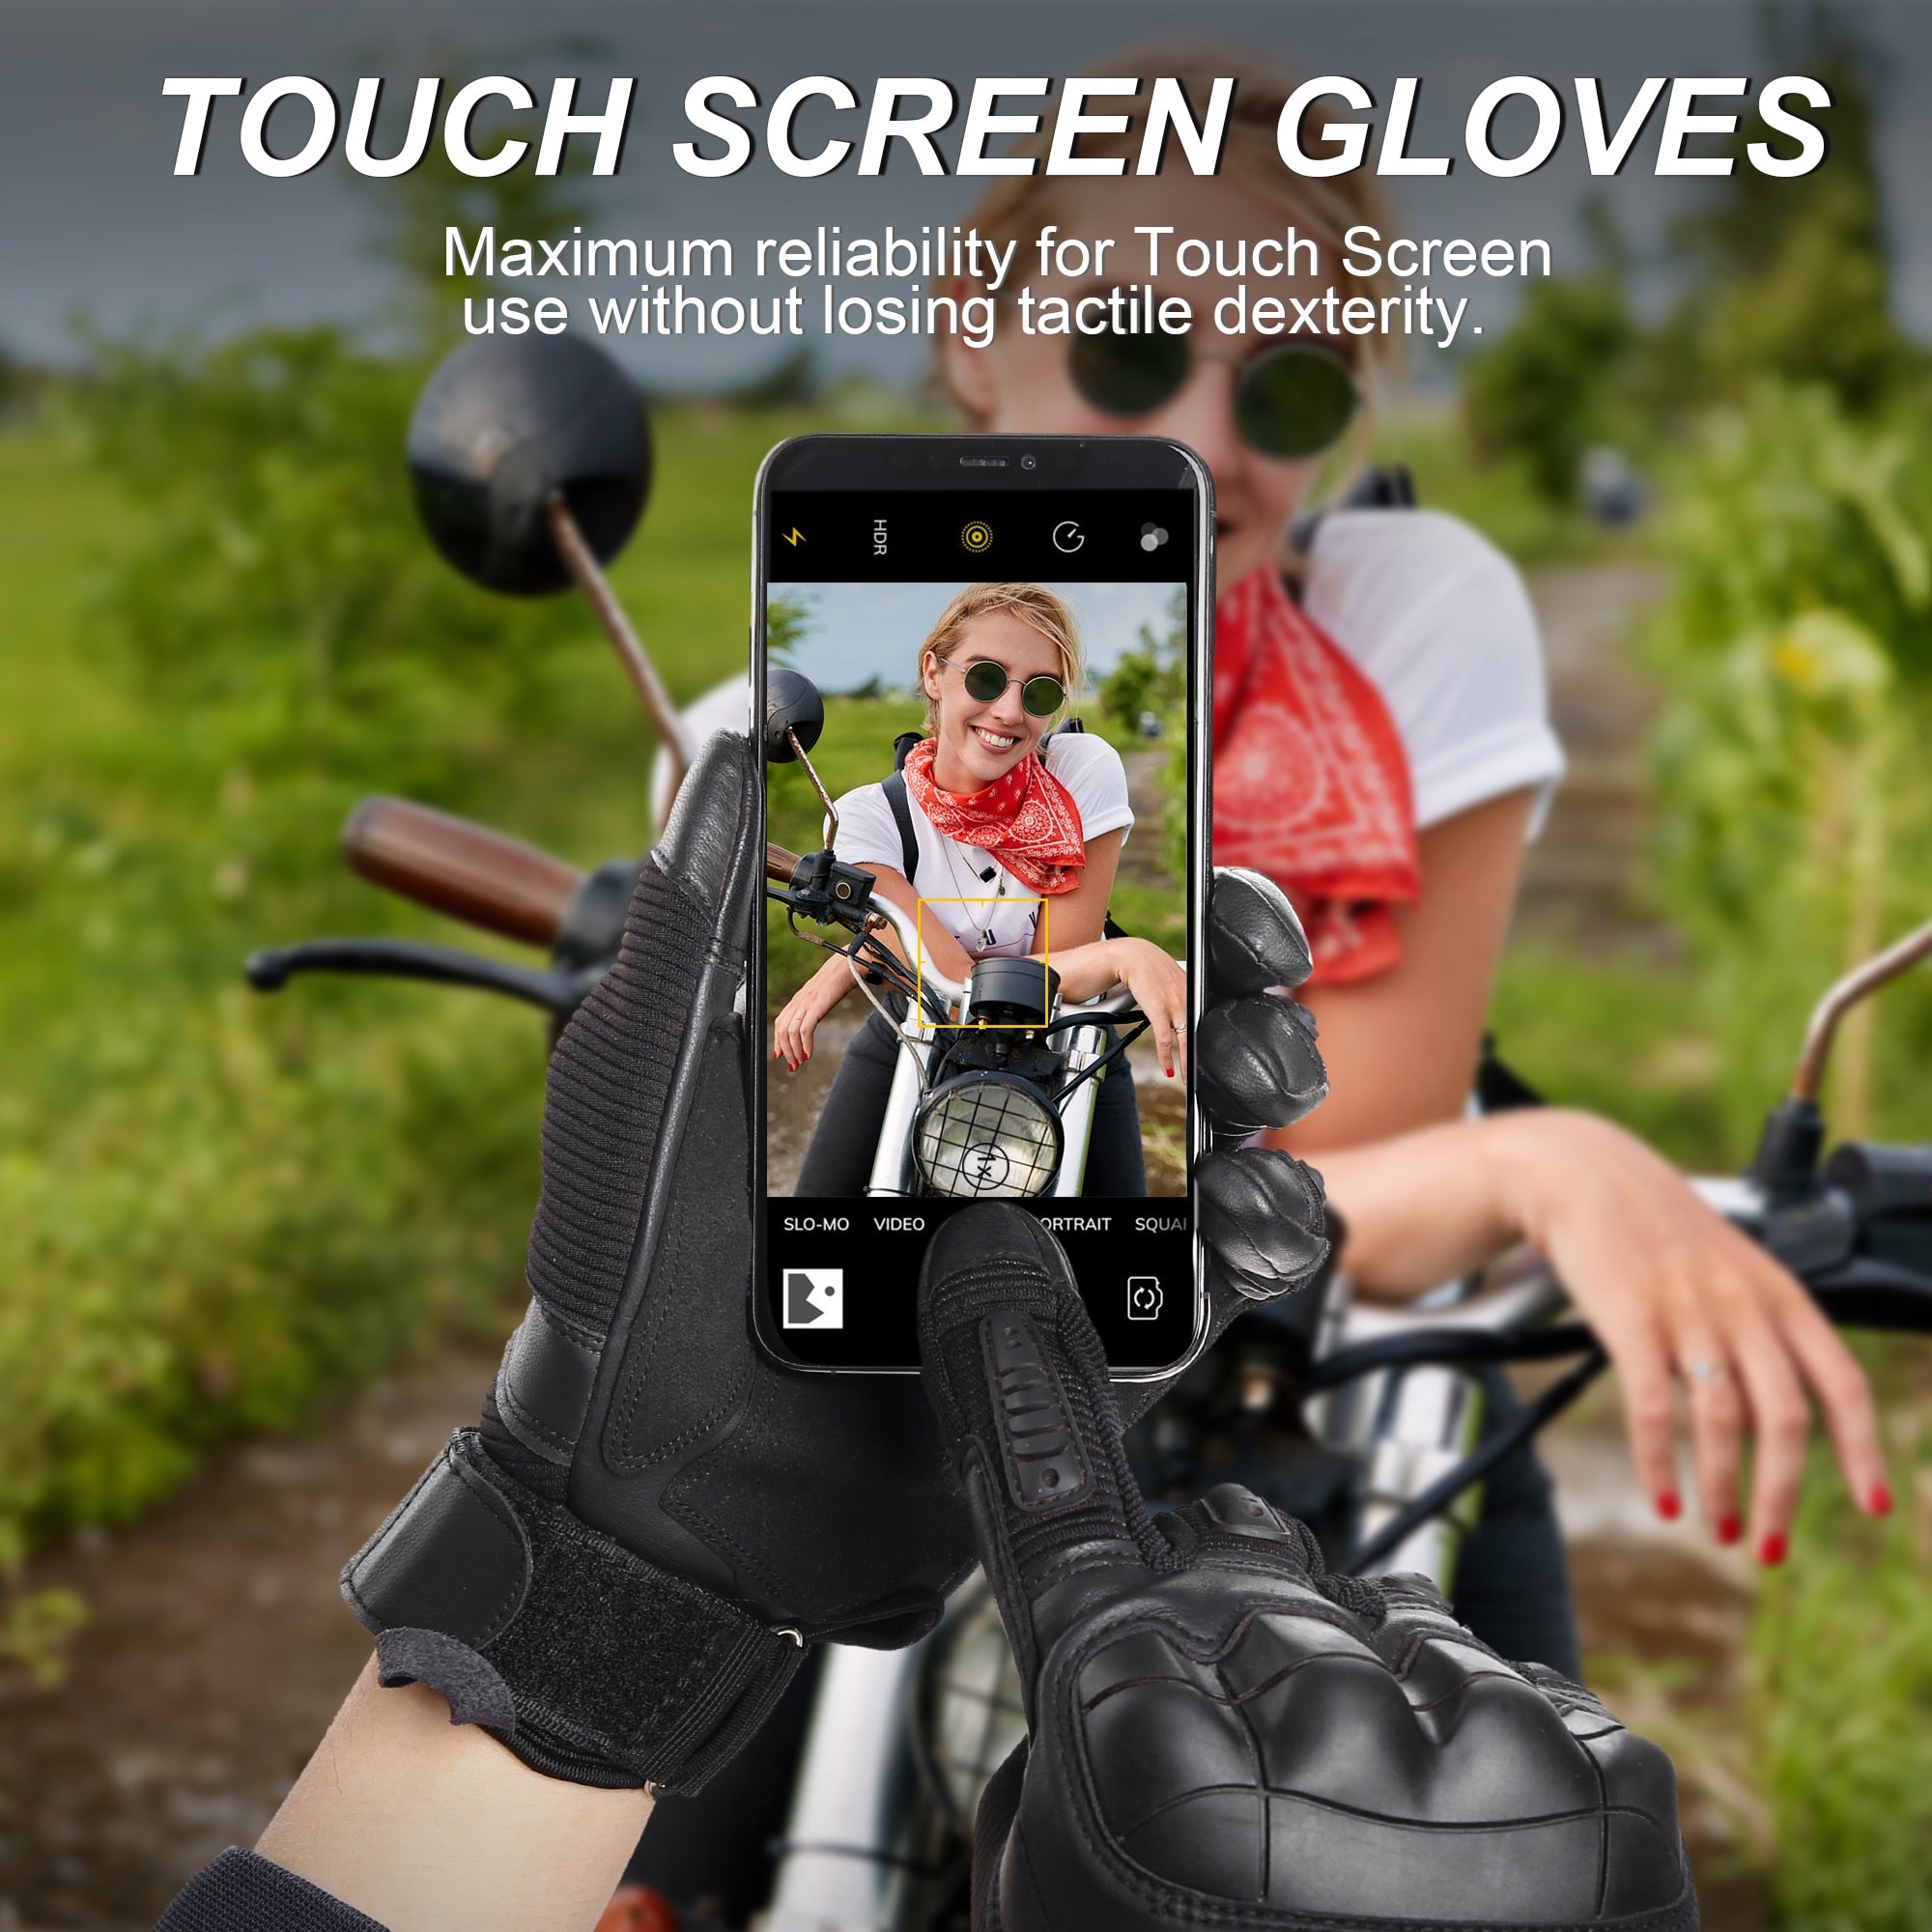 "APEX" Leather Gloves with Touch-Screen | Guanti Tattici in Pelle con Touch-Screen